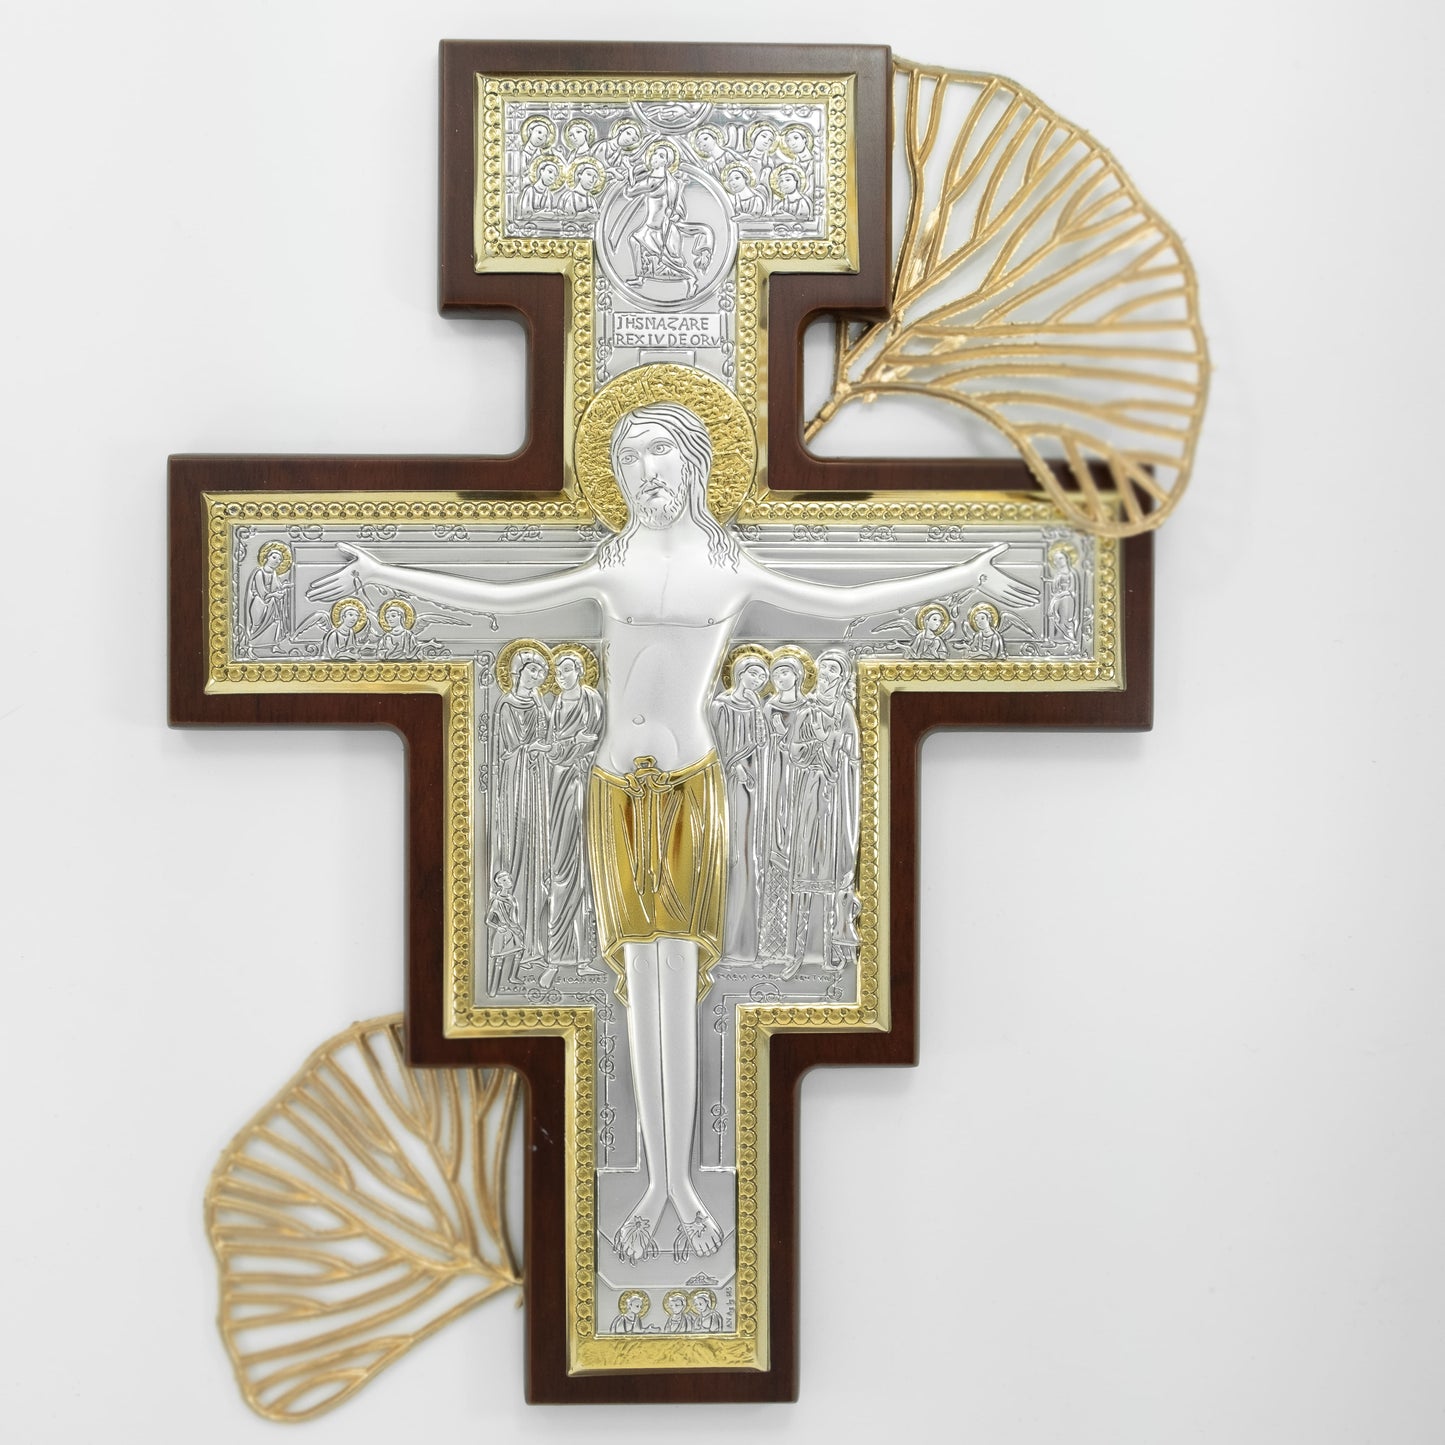 MONDO CATTOLICO Wooden San Damiano Crucifix With Sterling Silver Plaque and Gold Details